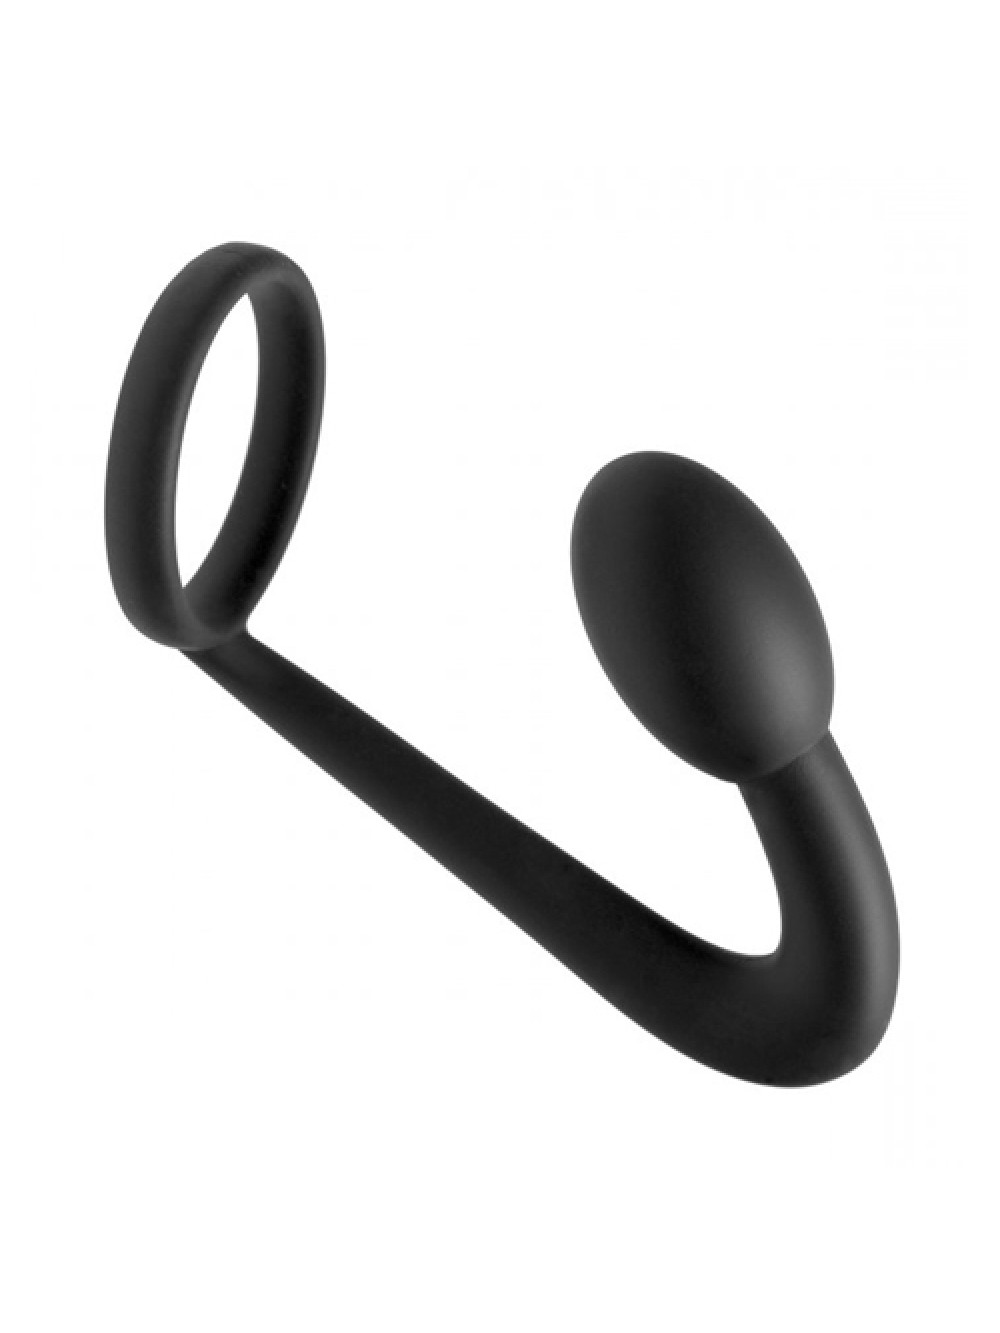 Prostatic Play Explorer Silicone Cock Ring and Prostate Plug